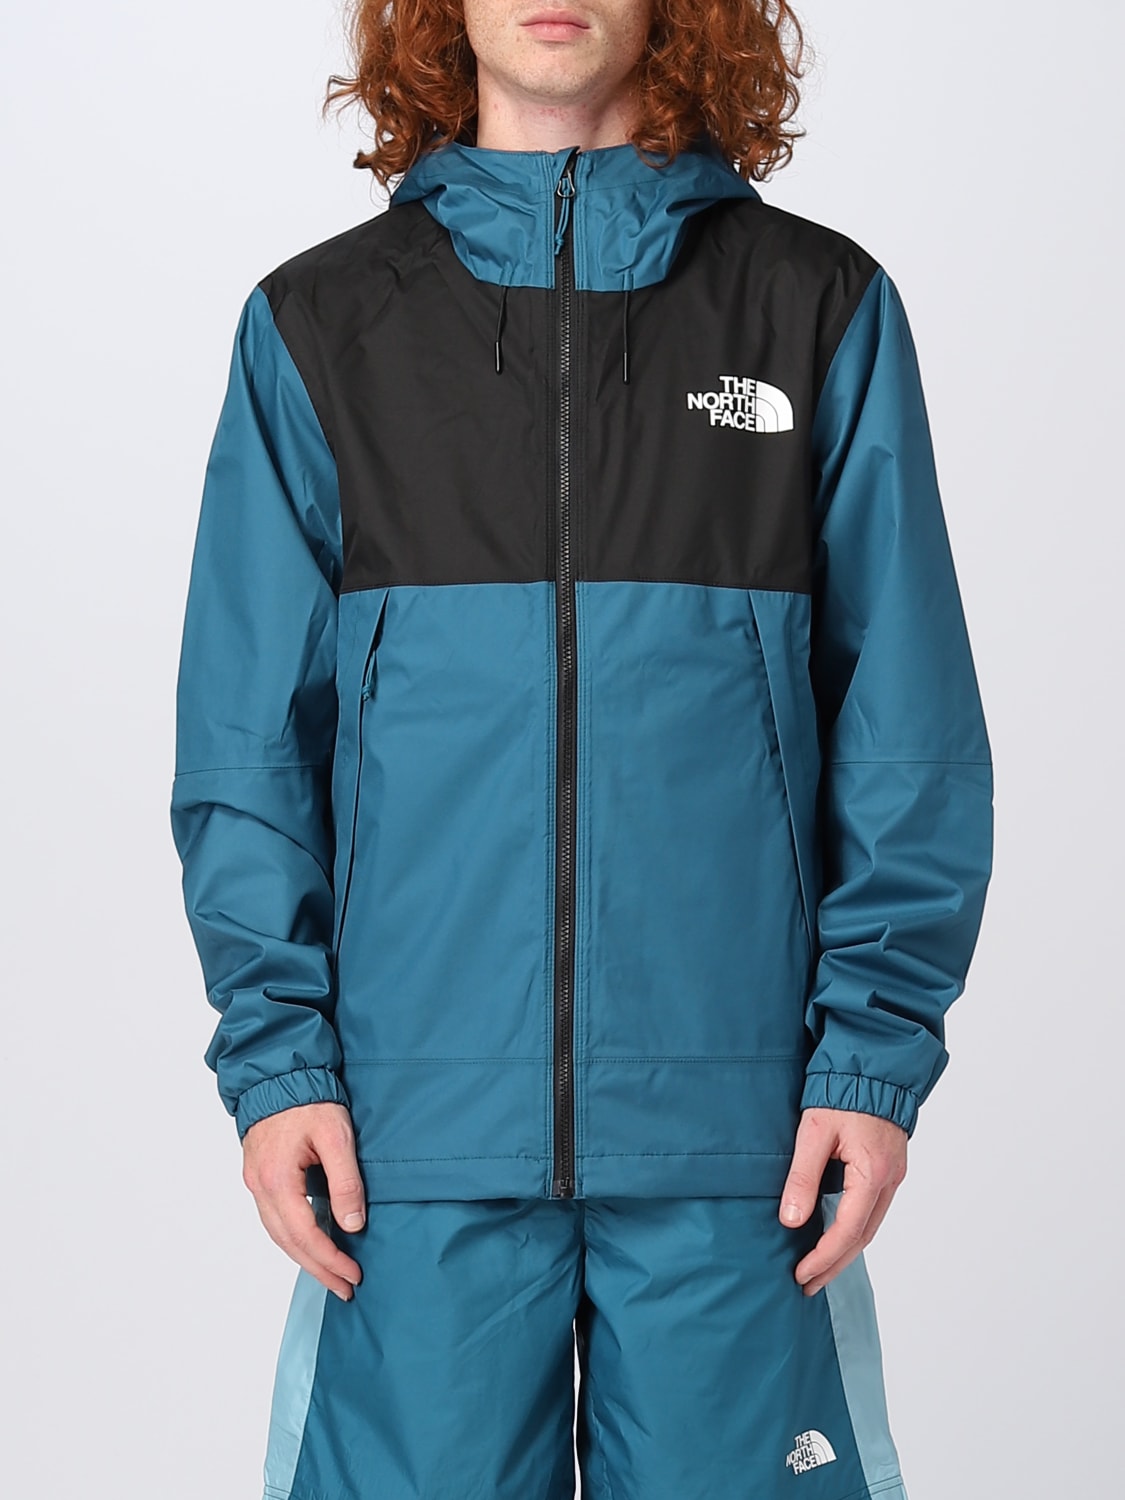 THE NORTH FACE: jacket for man - Green | The North Face jacket NF0A5IG2 ...